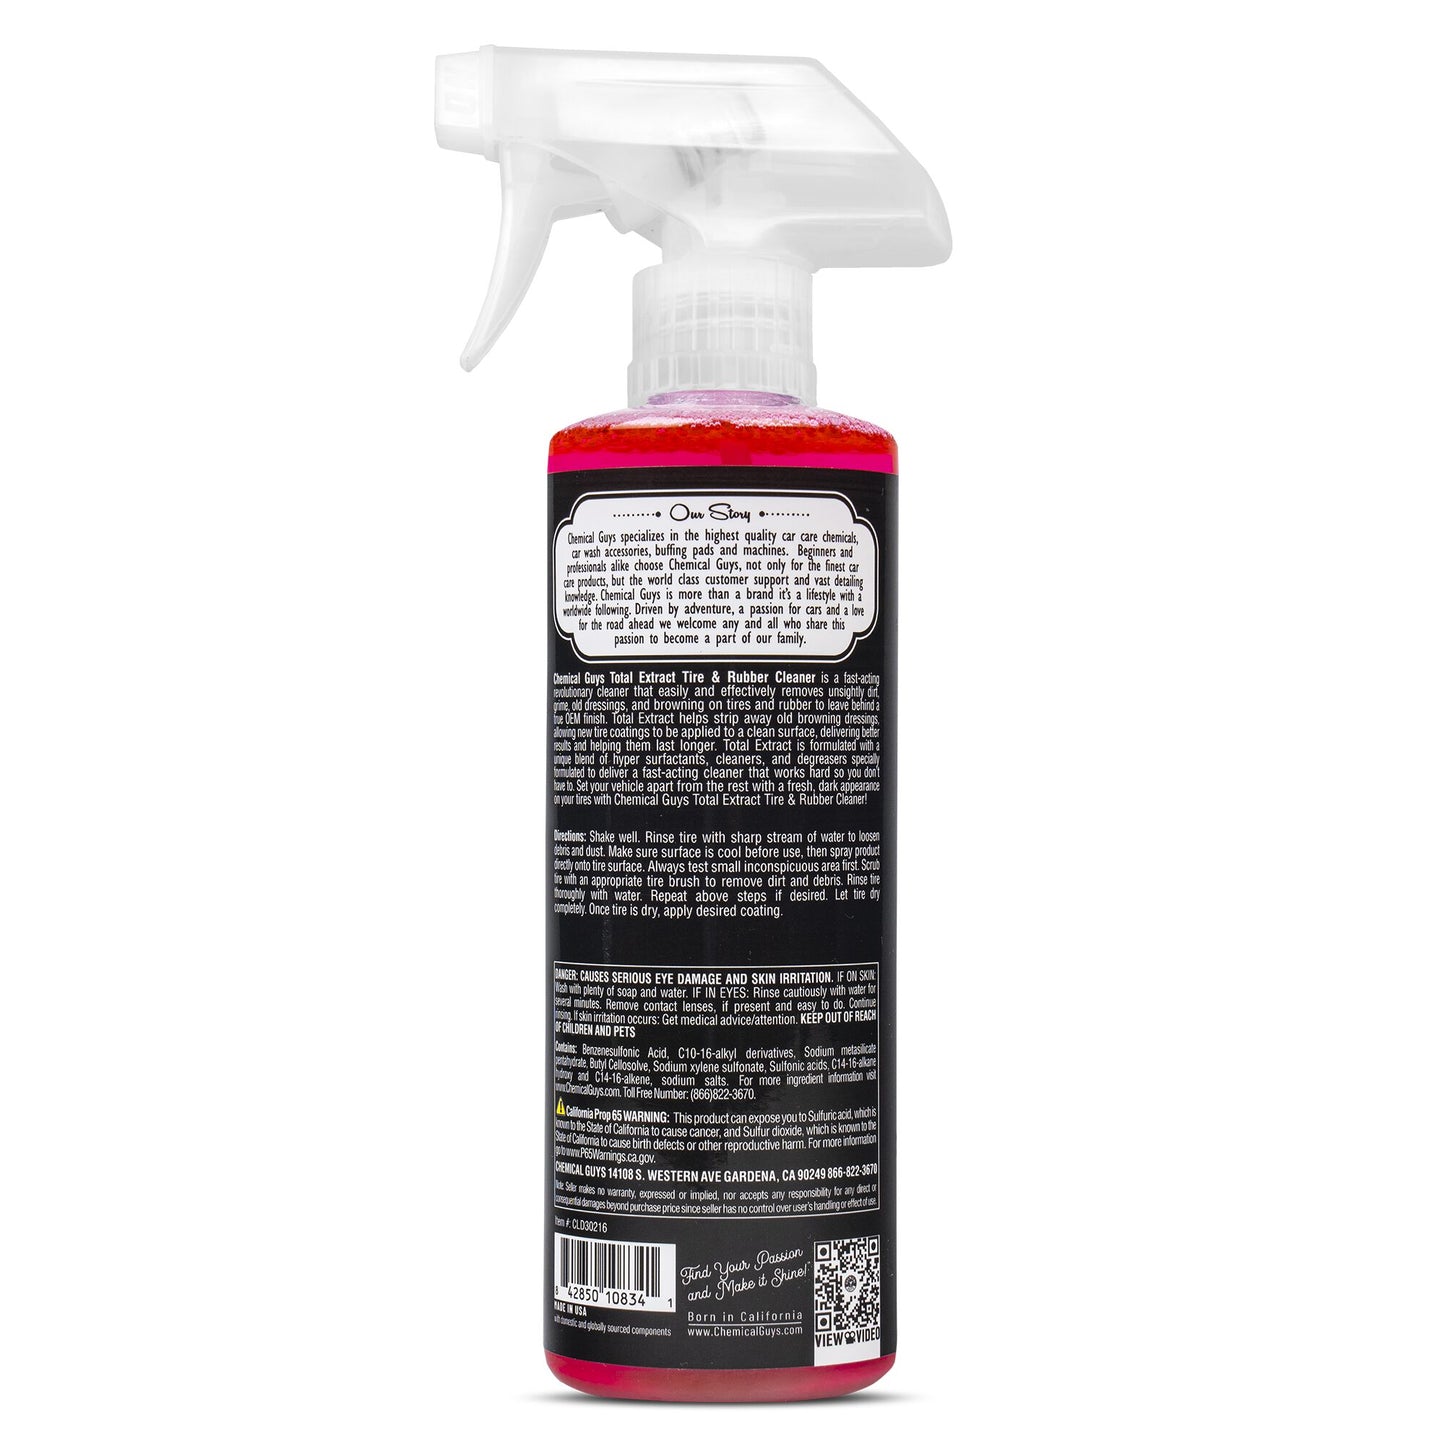 Total Extract Tire & Rubber Cleaner